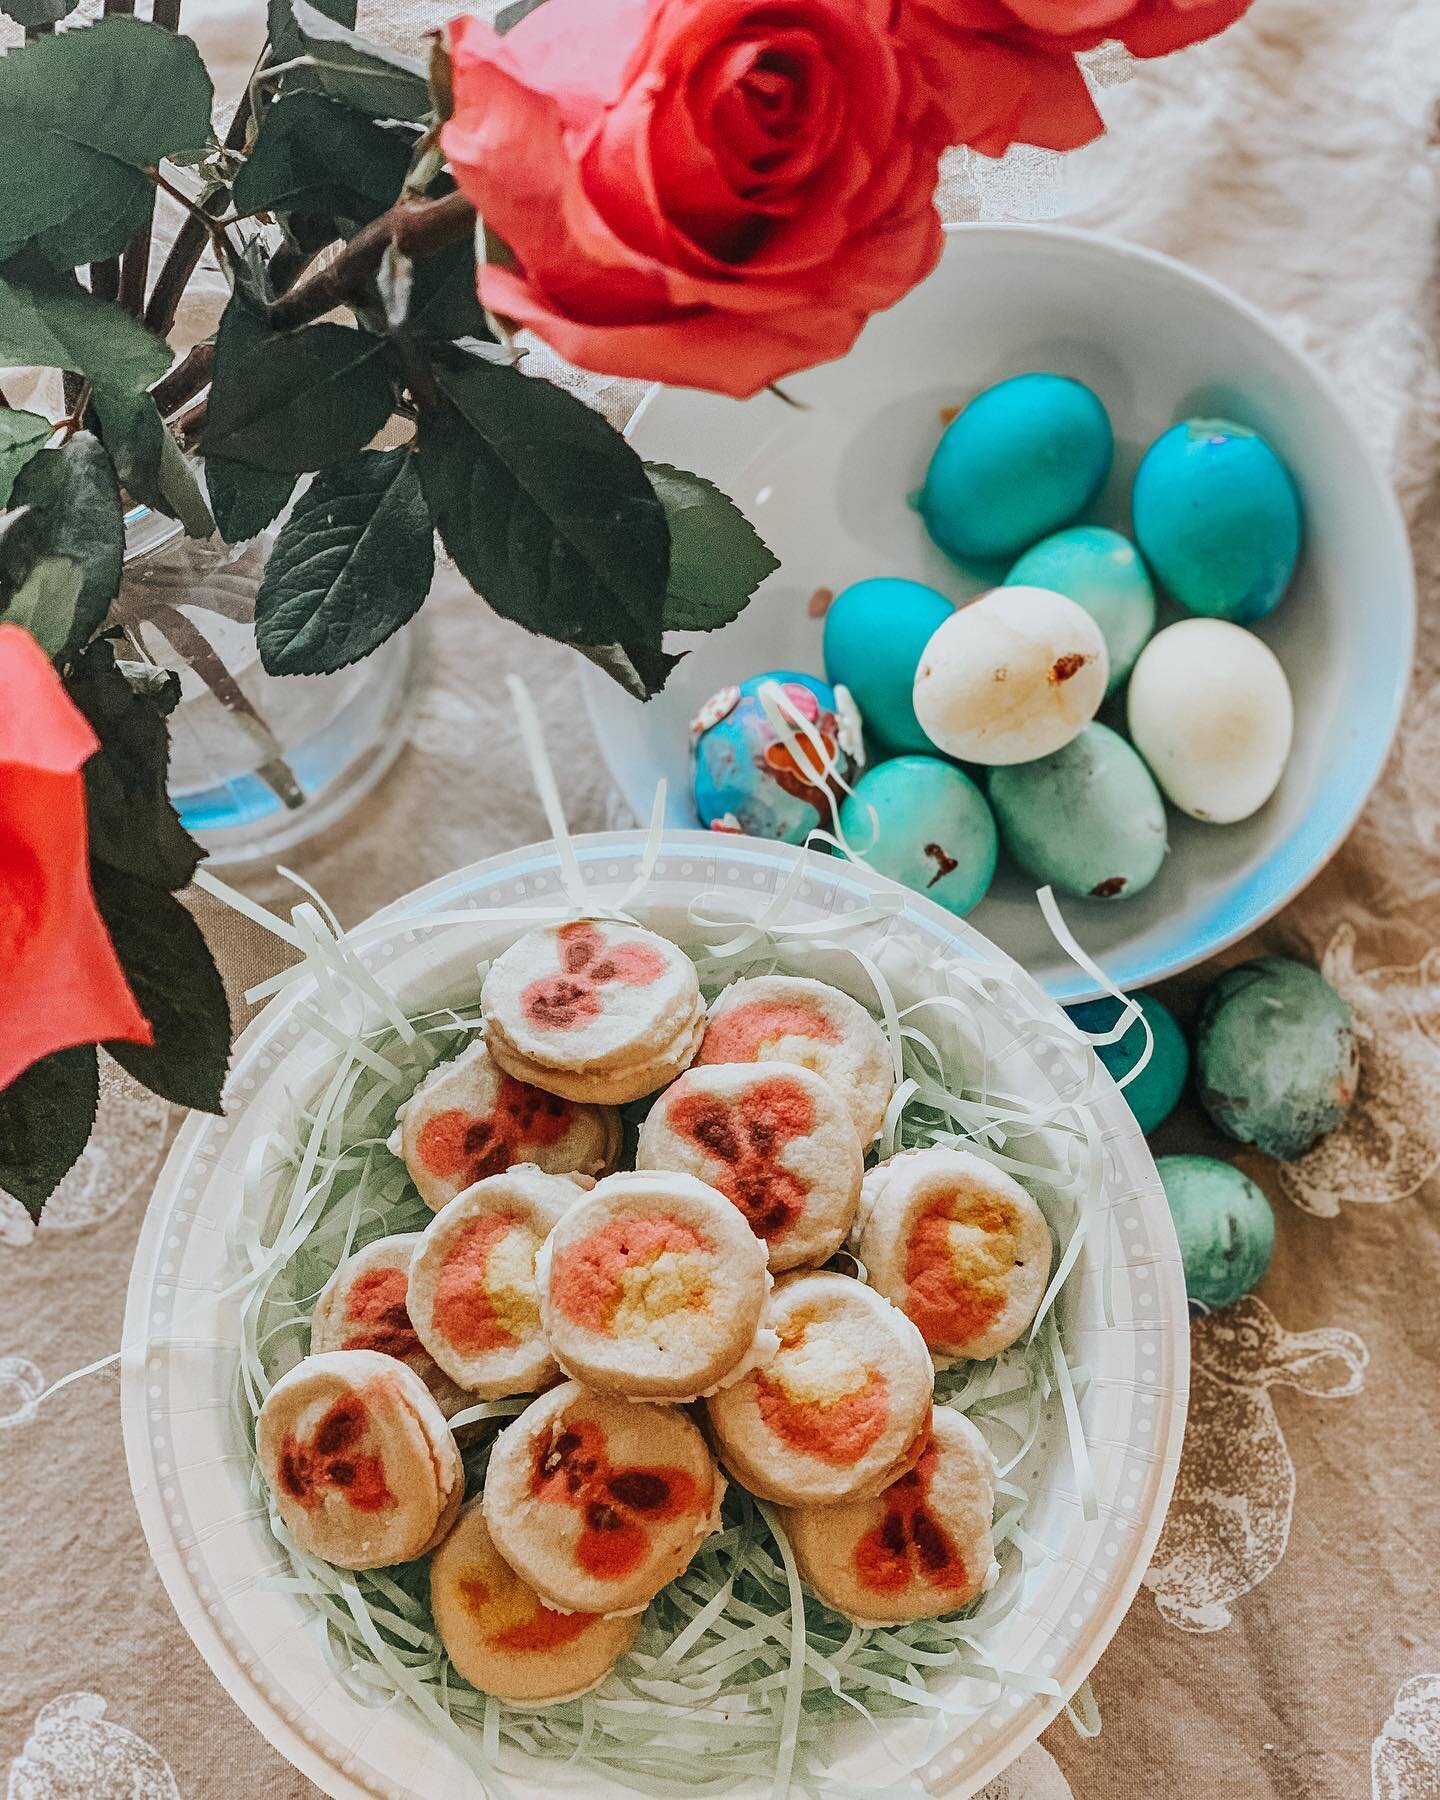 Little kid approved Easter Cookie recipe &amp; activity 🐰 

EASY:
I LIVE for finding quick and maintenance free things to do with my 4 year old. Today during the twins nap time, we made some Easter cookies using @pillsbury pull apart cookies. 

A li